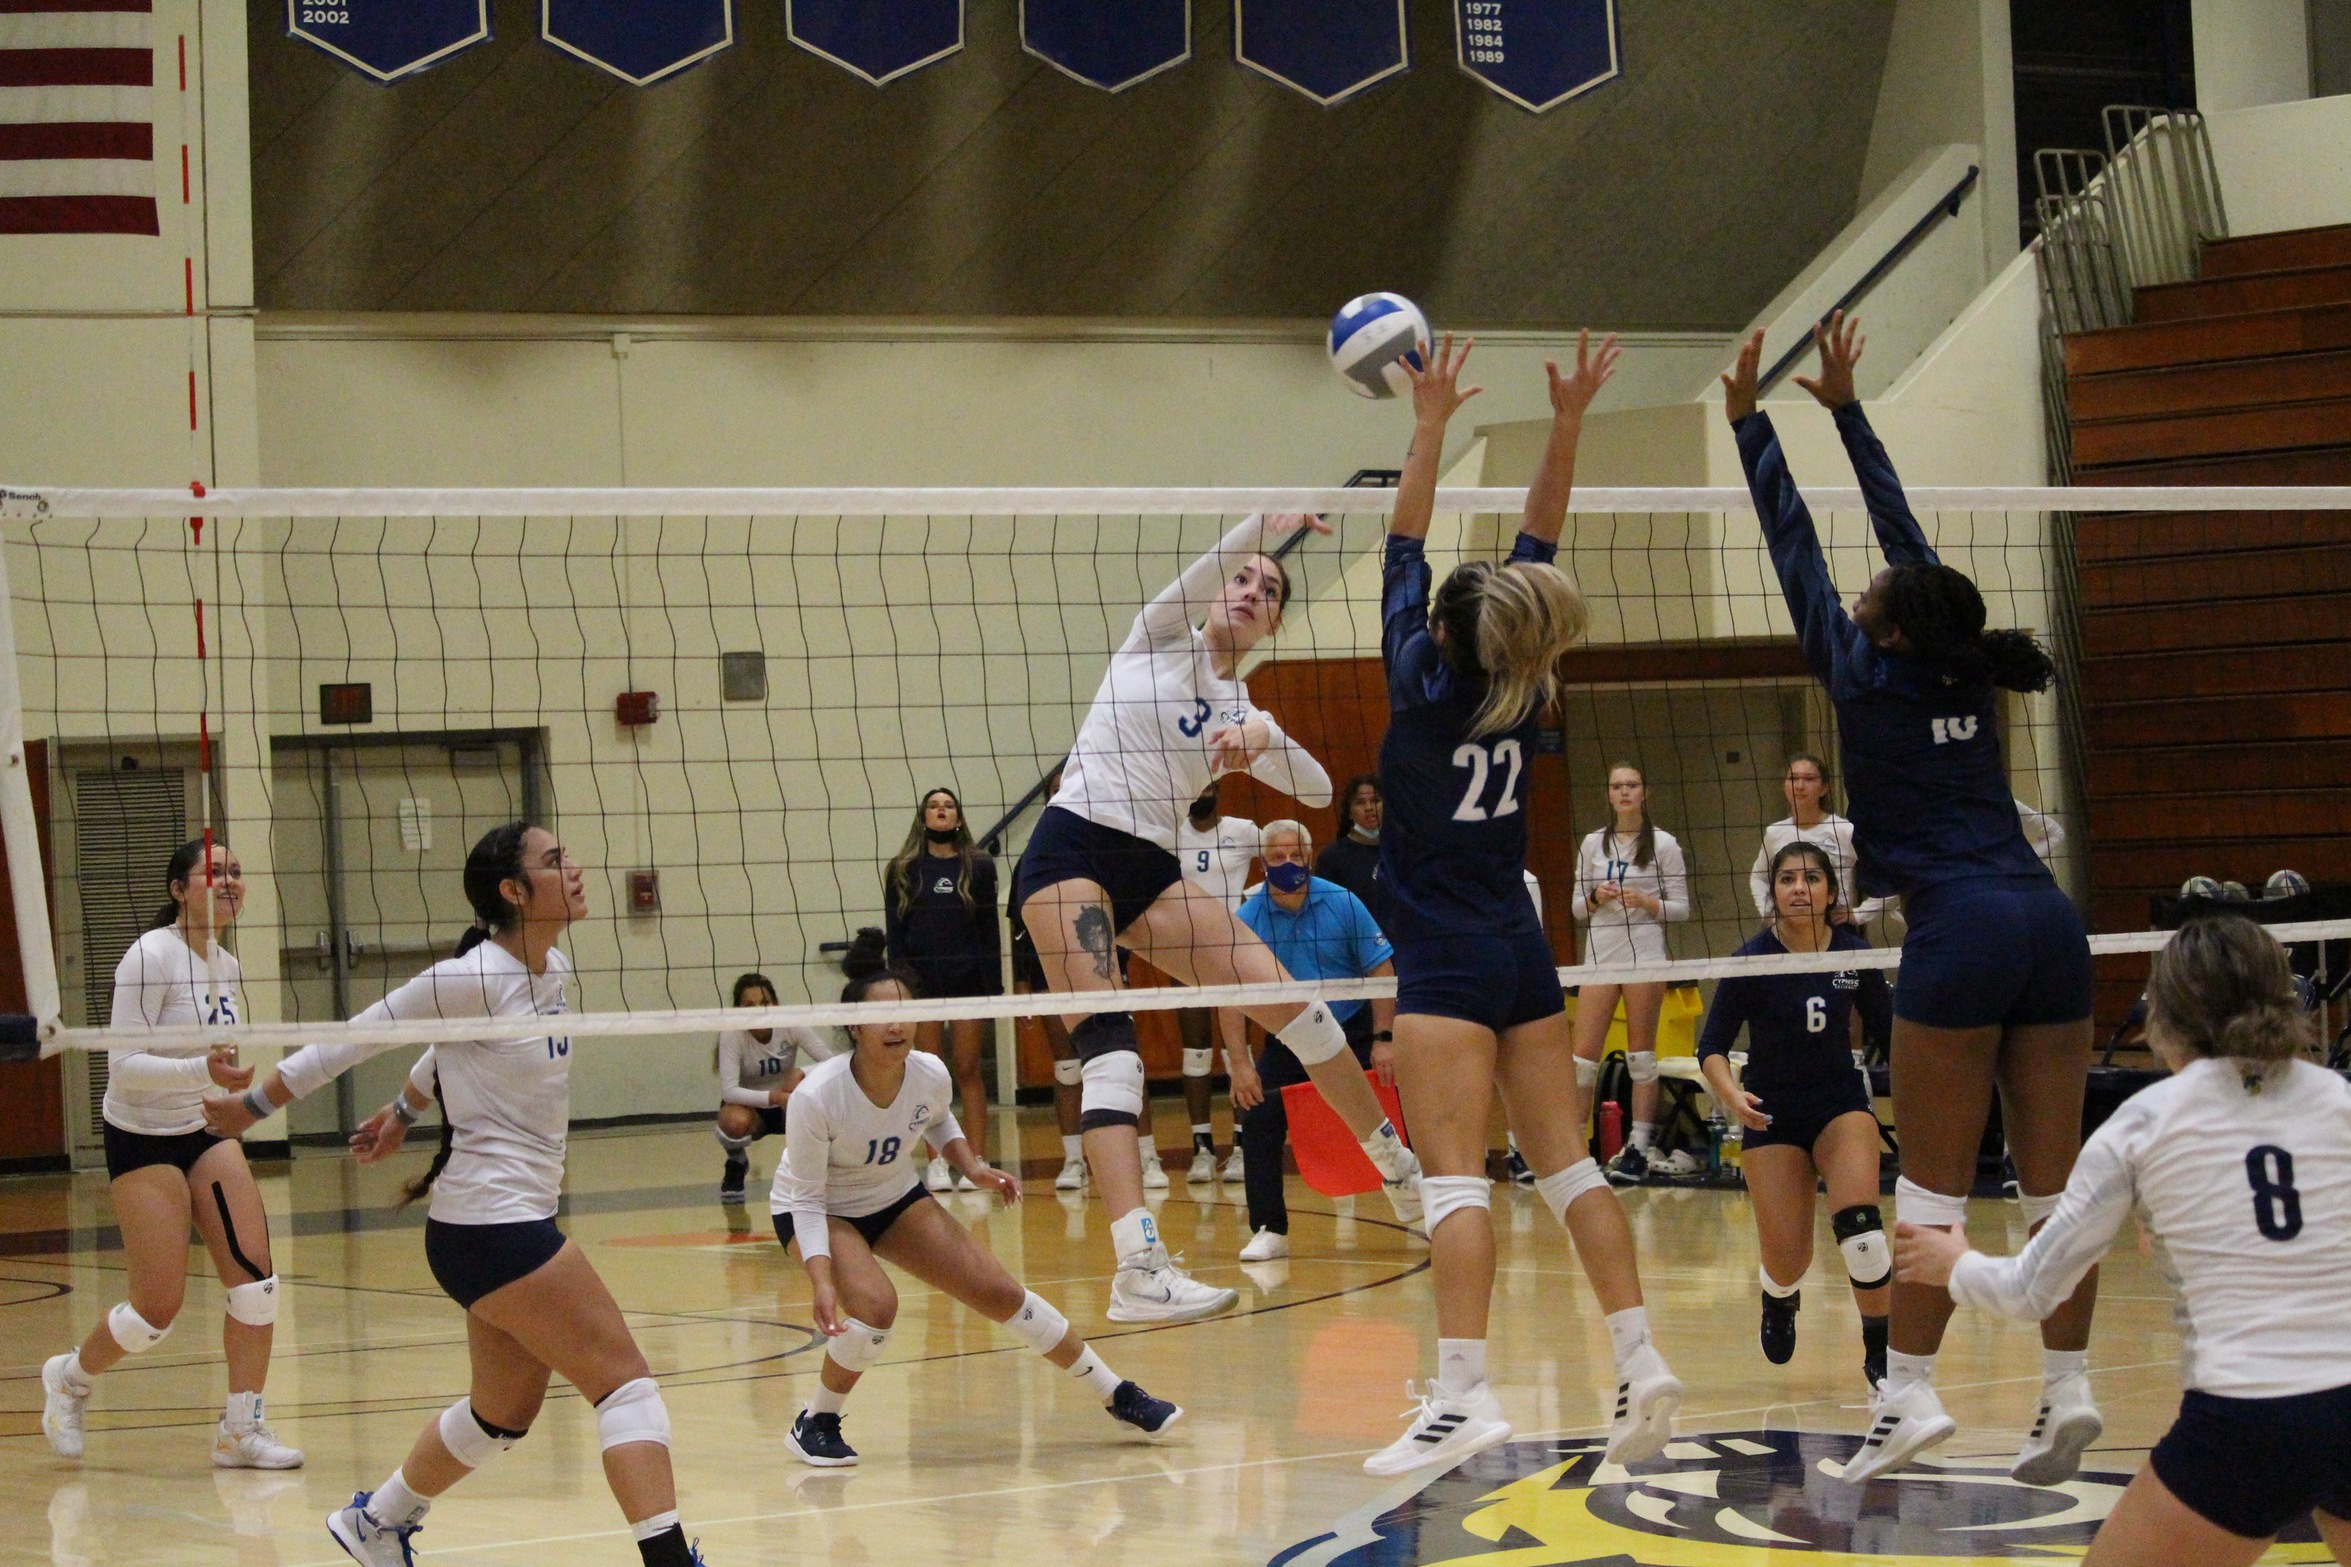 #5 Chargers Extend Win Streak to 10 in Thrilling Match Over Fullerton